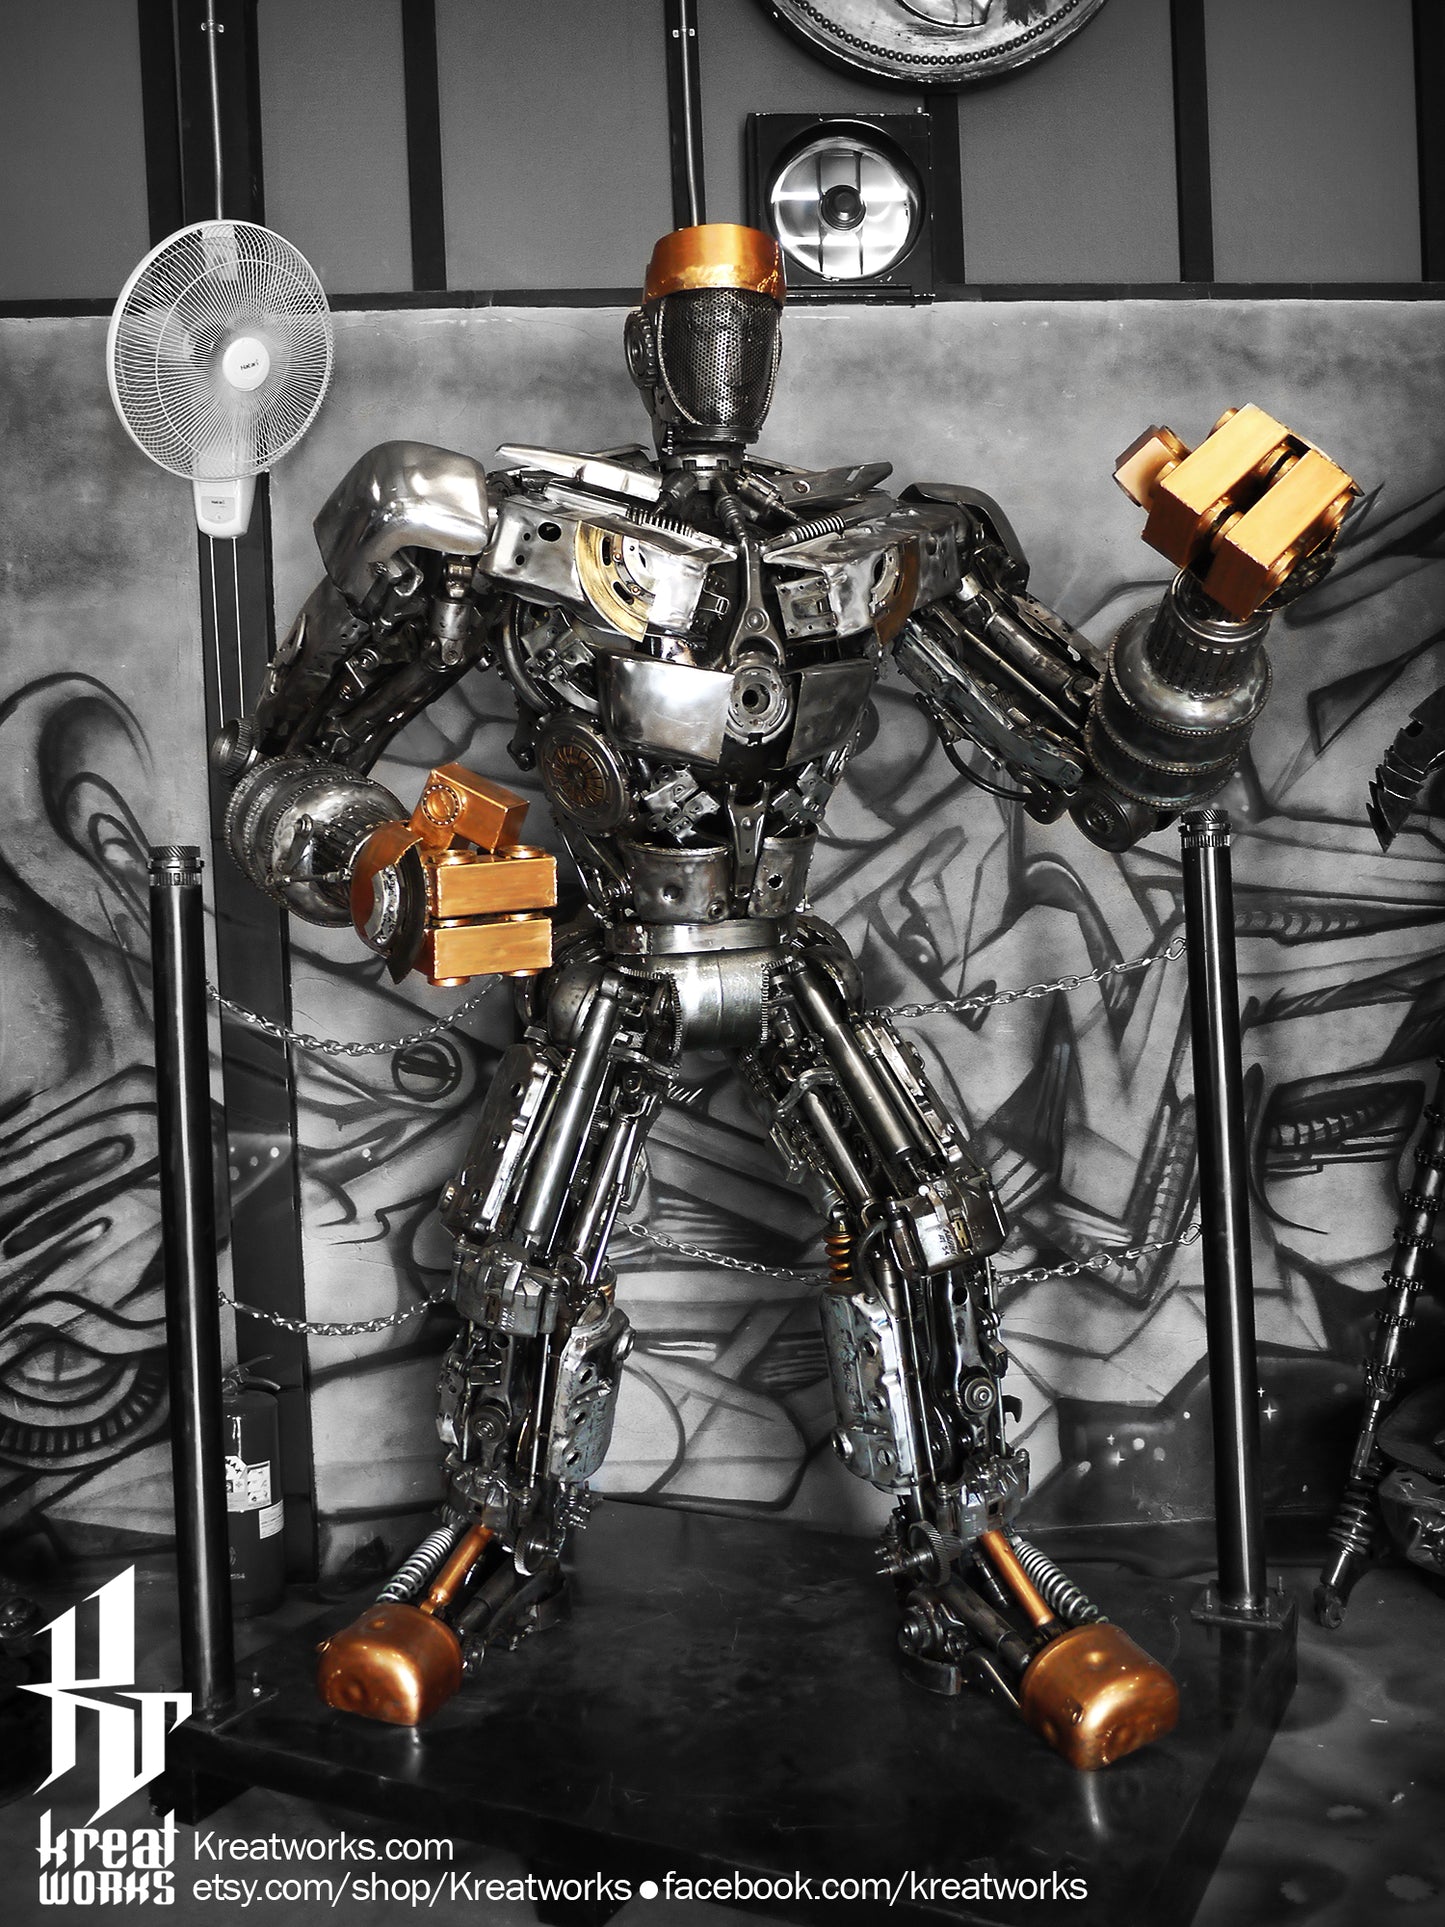 Recycled Metal Champion Boxing Robot (2.5 m height) / Recycle Metal Sustainable Sculpture Art